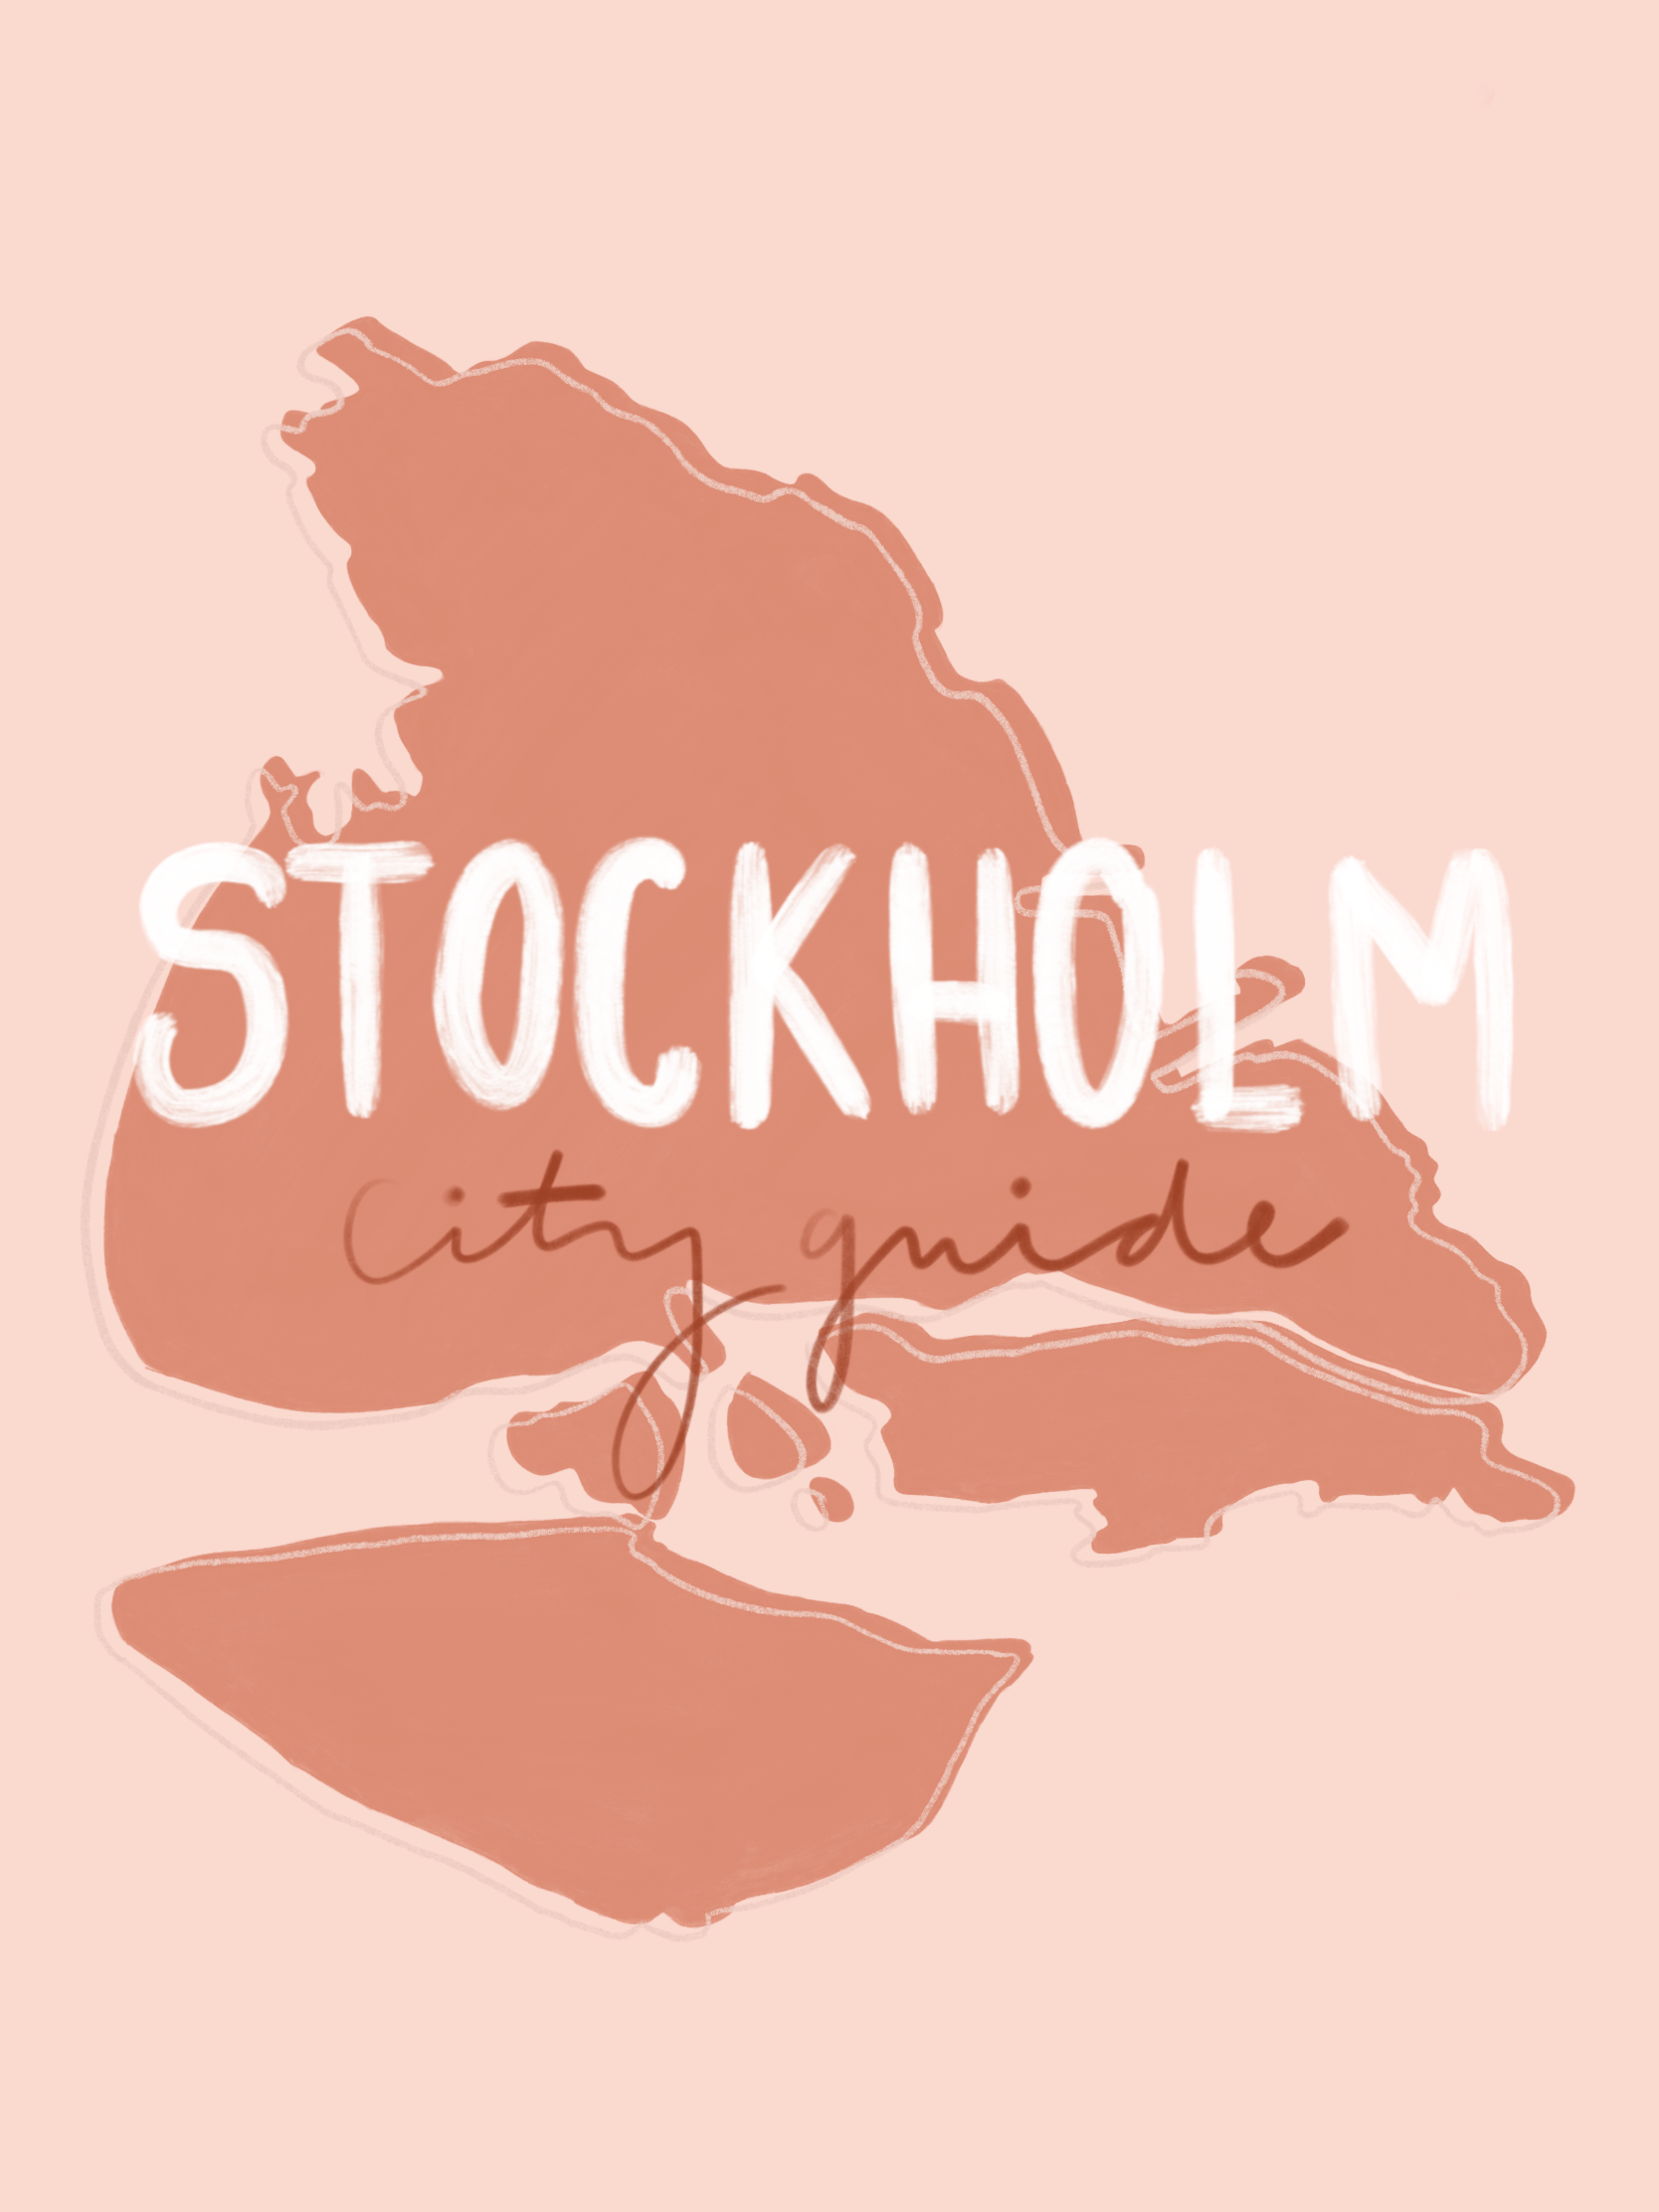 Stockholm City Guide, Stockholm, Visiting Stockholm, Places to see in Stockholm, where to eat in Stockholm, where to fika in Stockholm